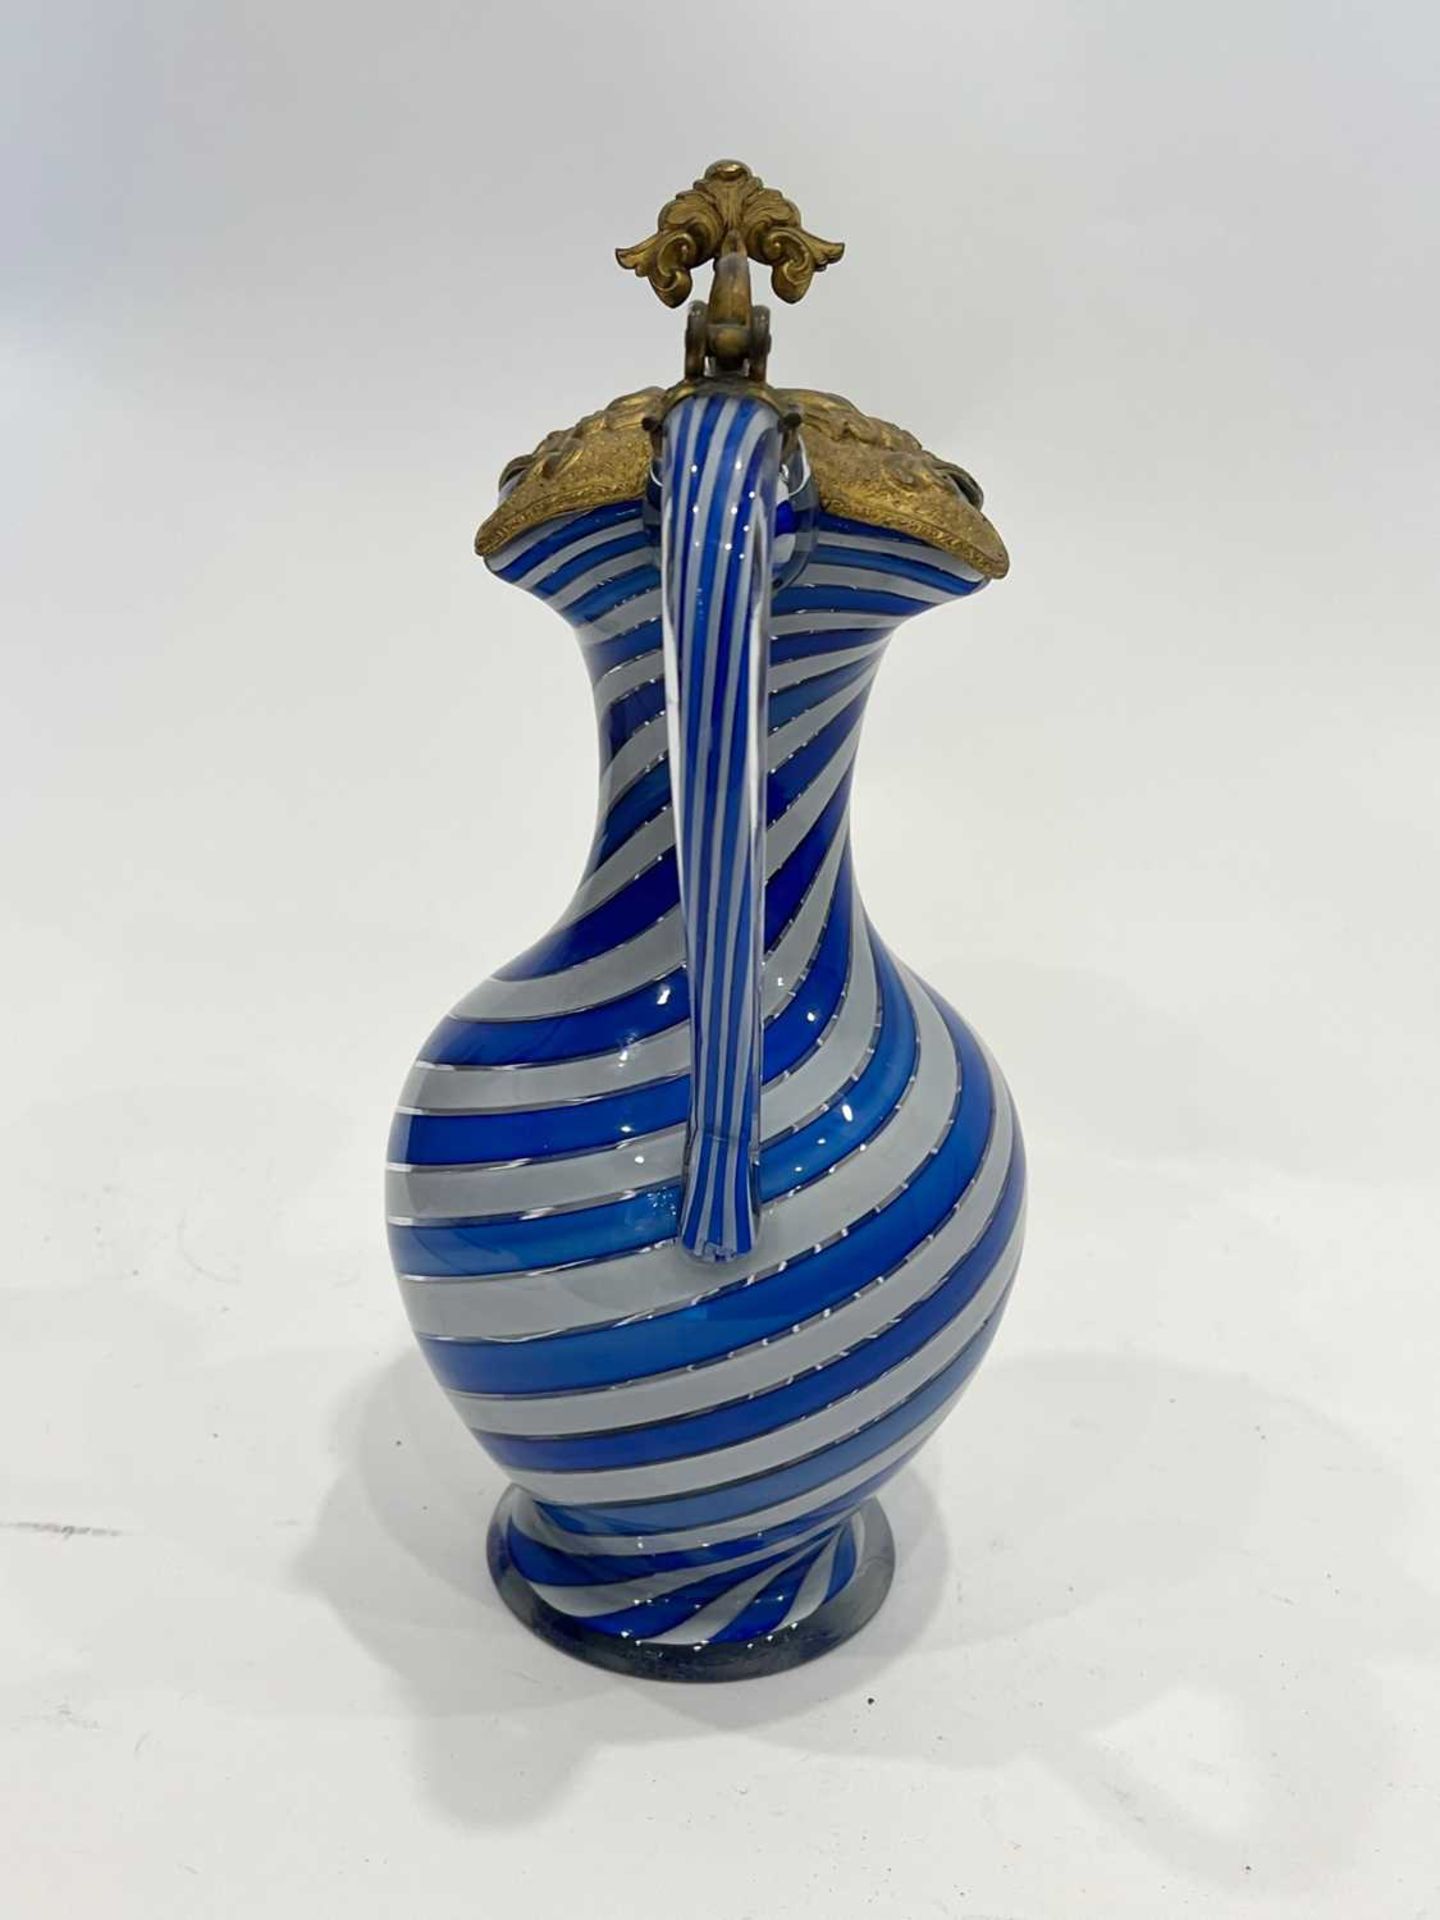 FOR THE PERSIAN / OTTOMAN MARKET : A LATE 19TH CENTURY FRENCH GLASS EWER - Image 7 of 12